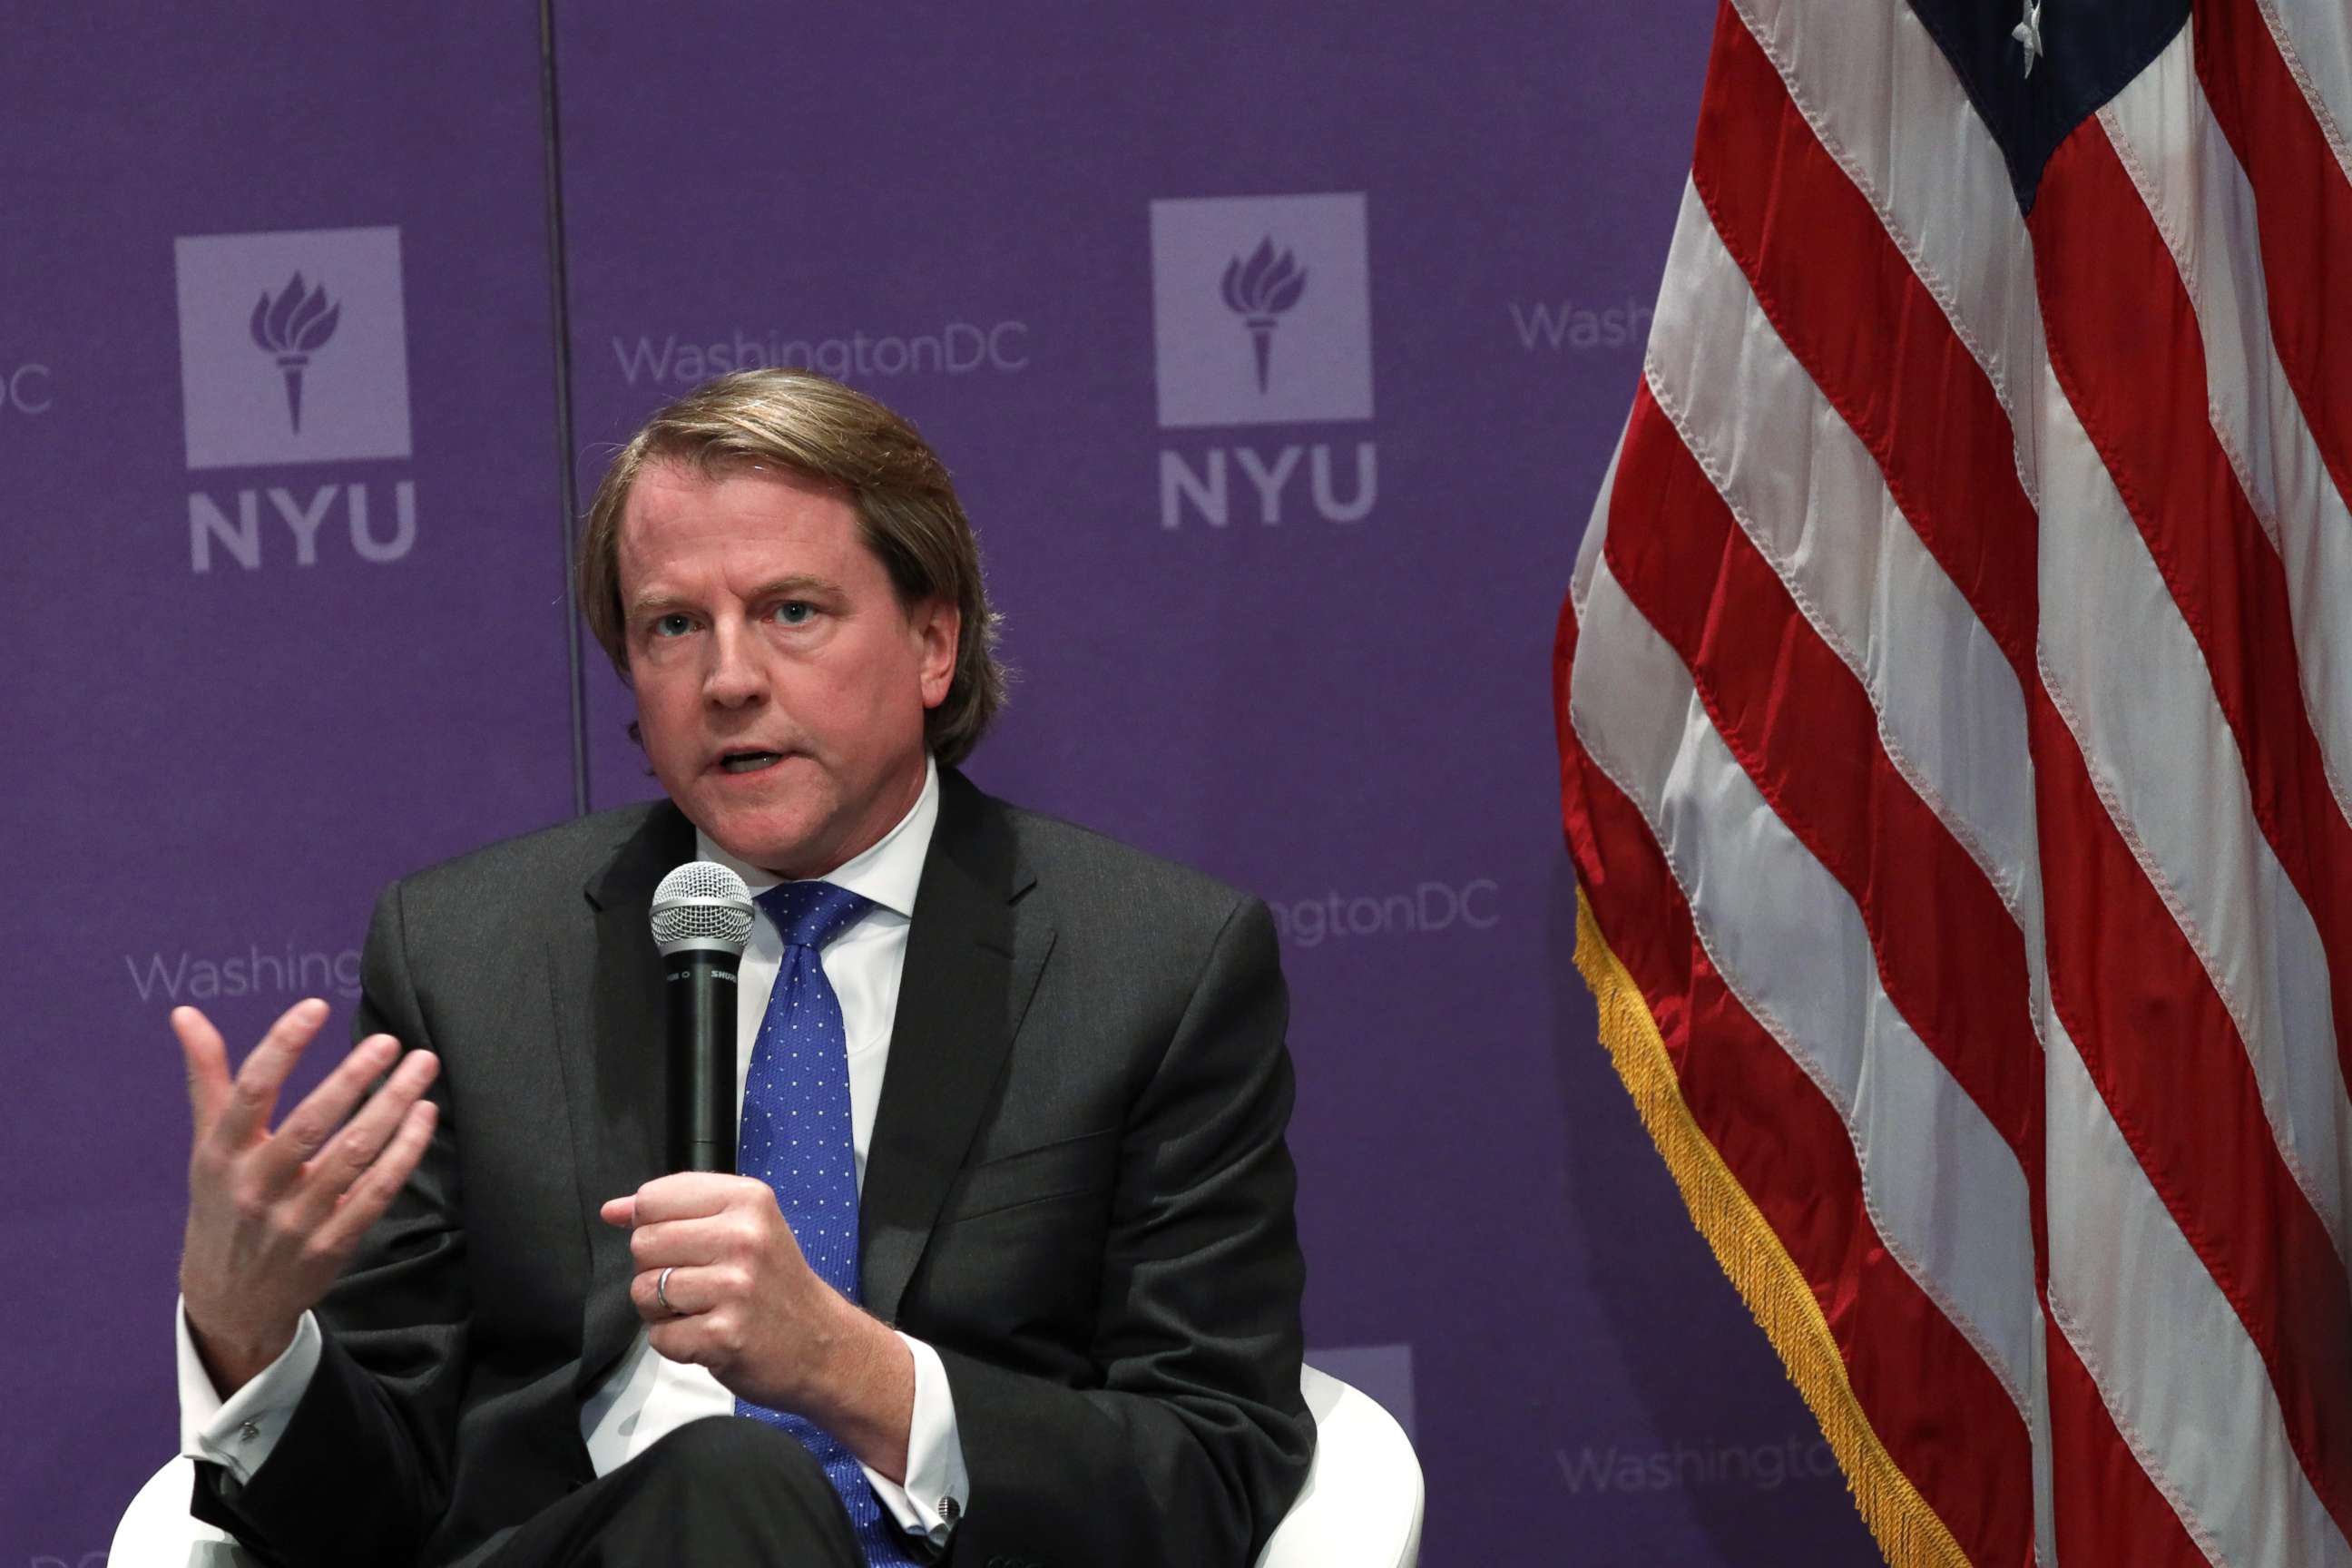 PHOTO: Former White House counsel Don McGahn speaks during a discussion on "Constitutional Questions and Political Struggle: Congress' Role in Oversight and National Security," Dec. 12, 2019, at the NYU Global Academic Center in Washington, DC.